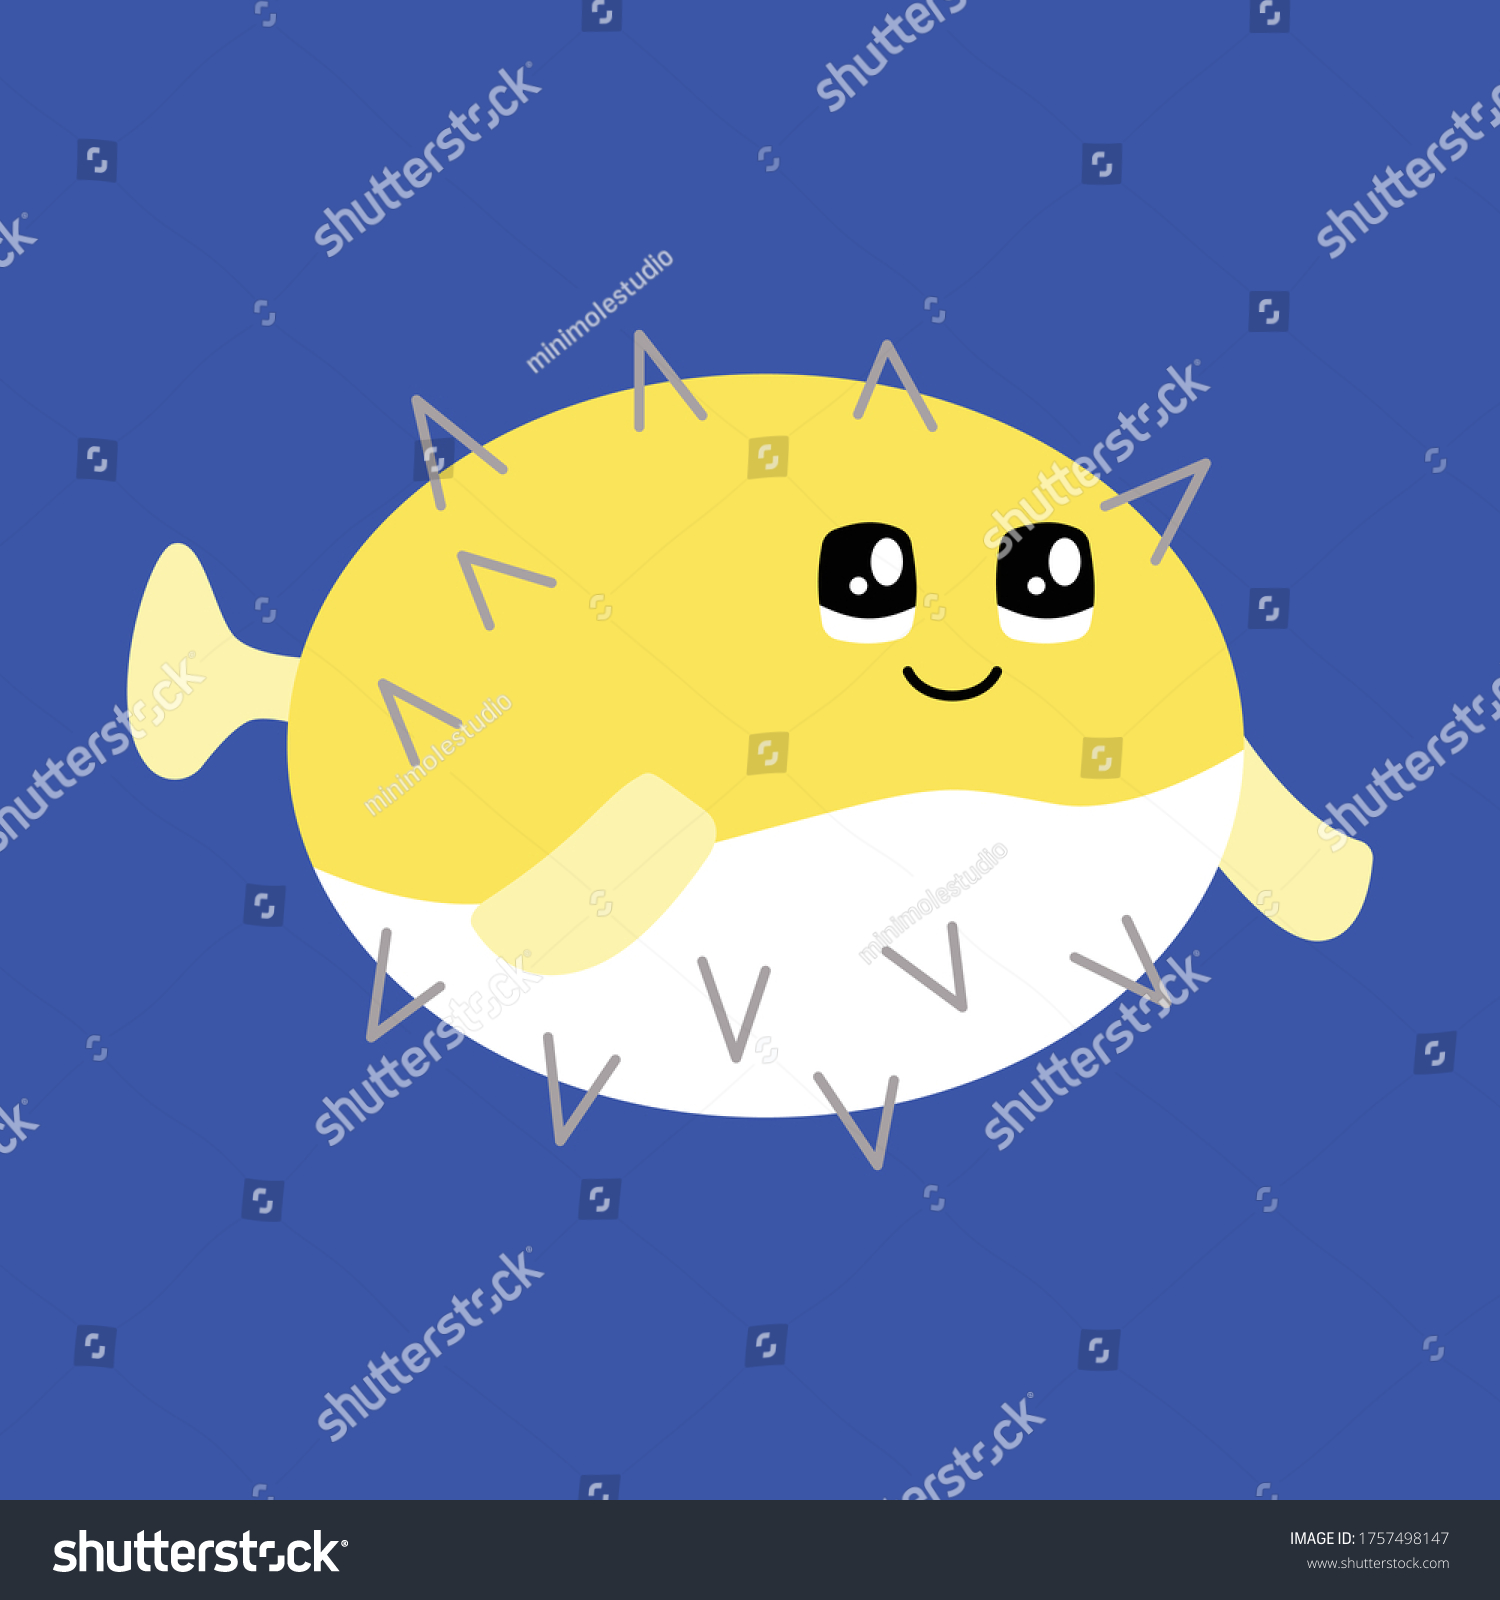 SVG of Vector illustration of a pufferfish with a cute face. Simple, flat kawaii style. svg